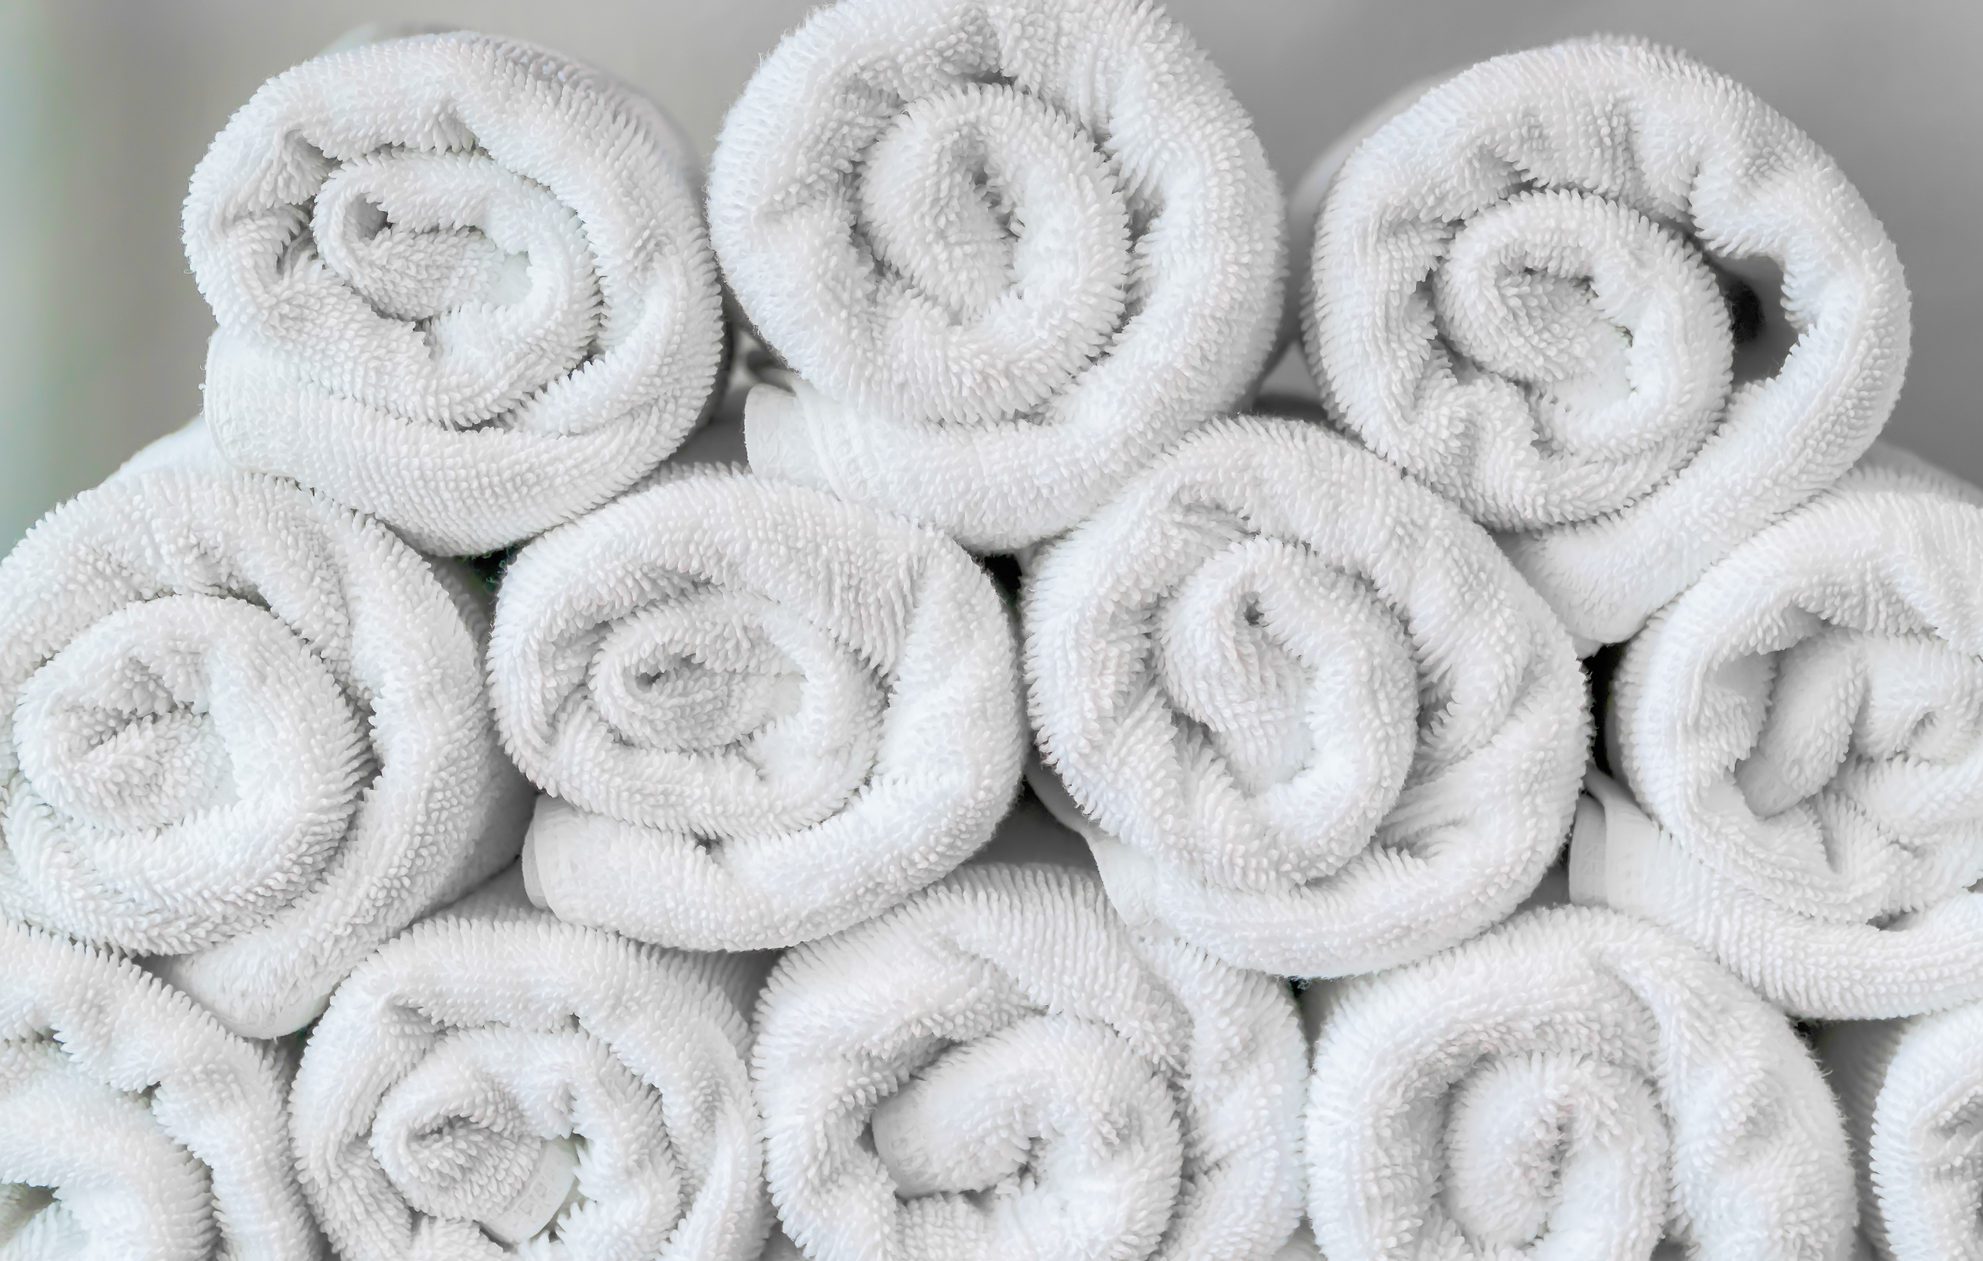 guests of our myrtle beach resort fitness center have ample access to towels for their workout